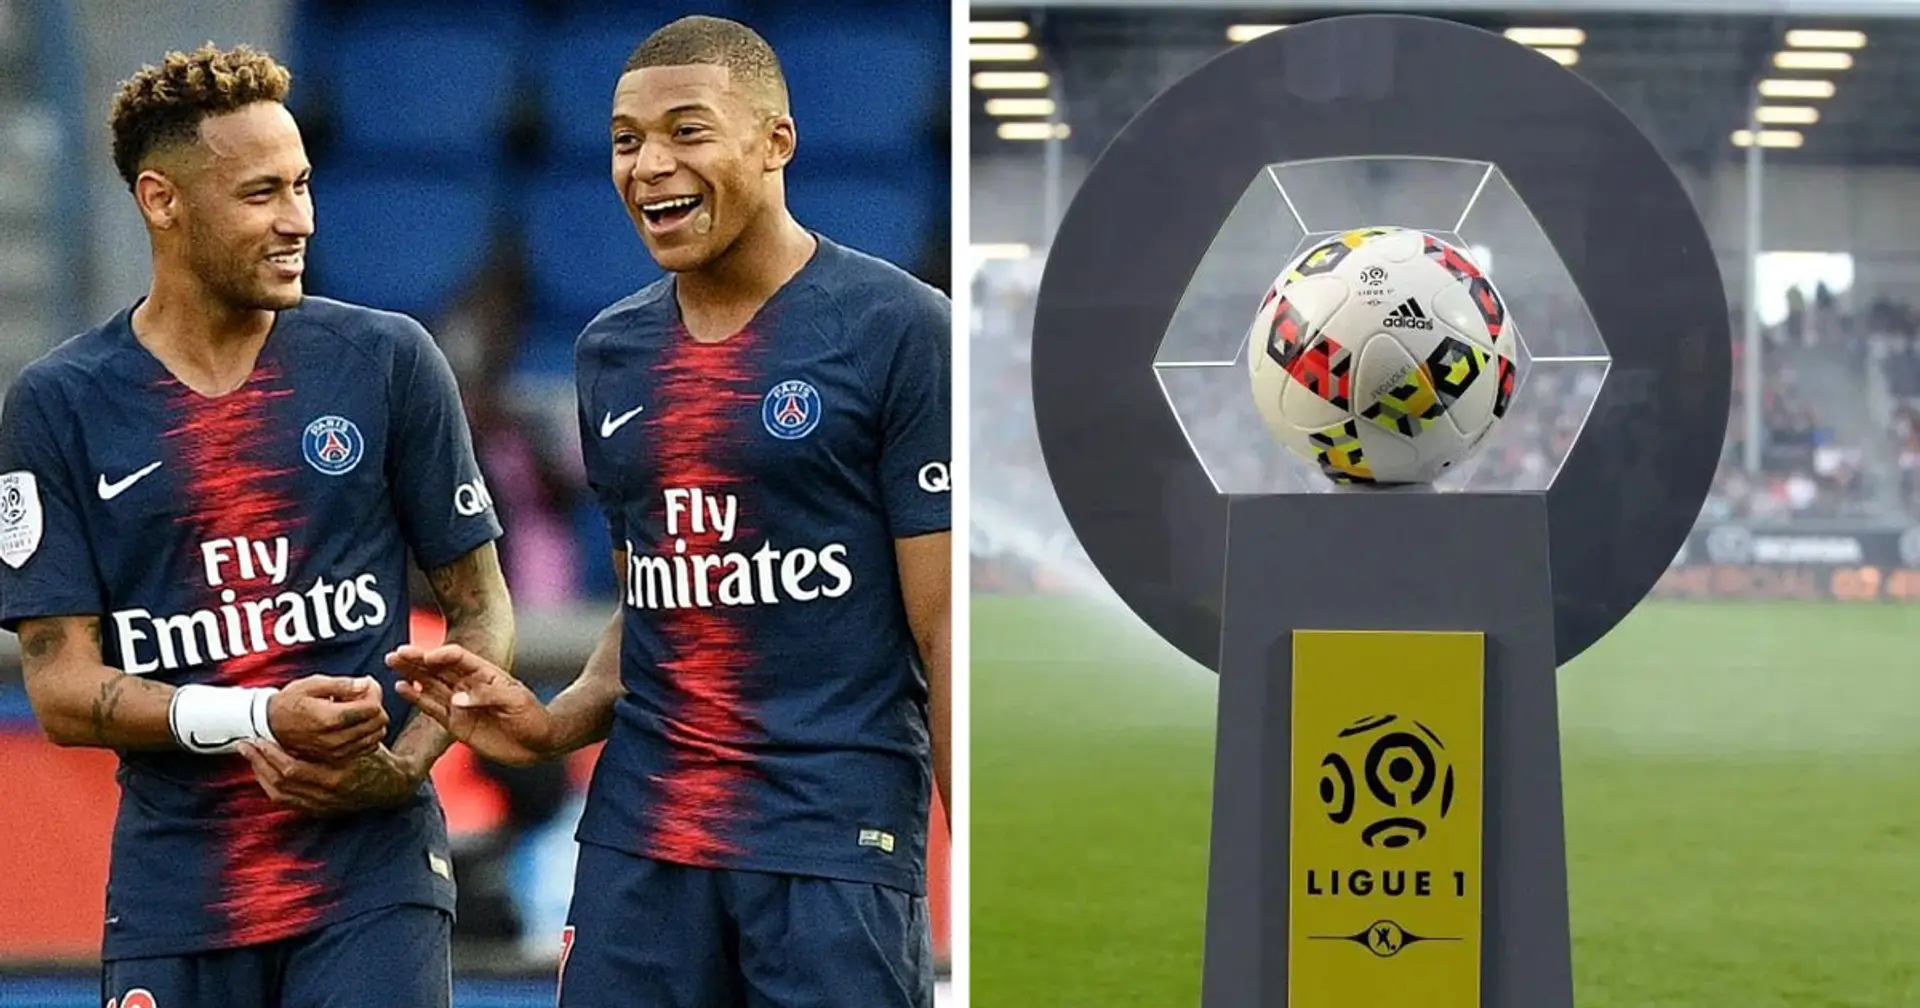 OFFICIAL: Ligue 1 announce PSG as champions, standings named final as it stands